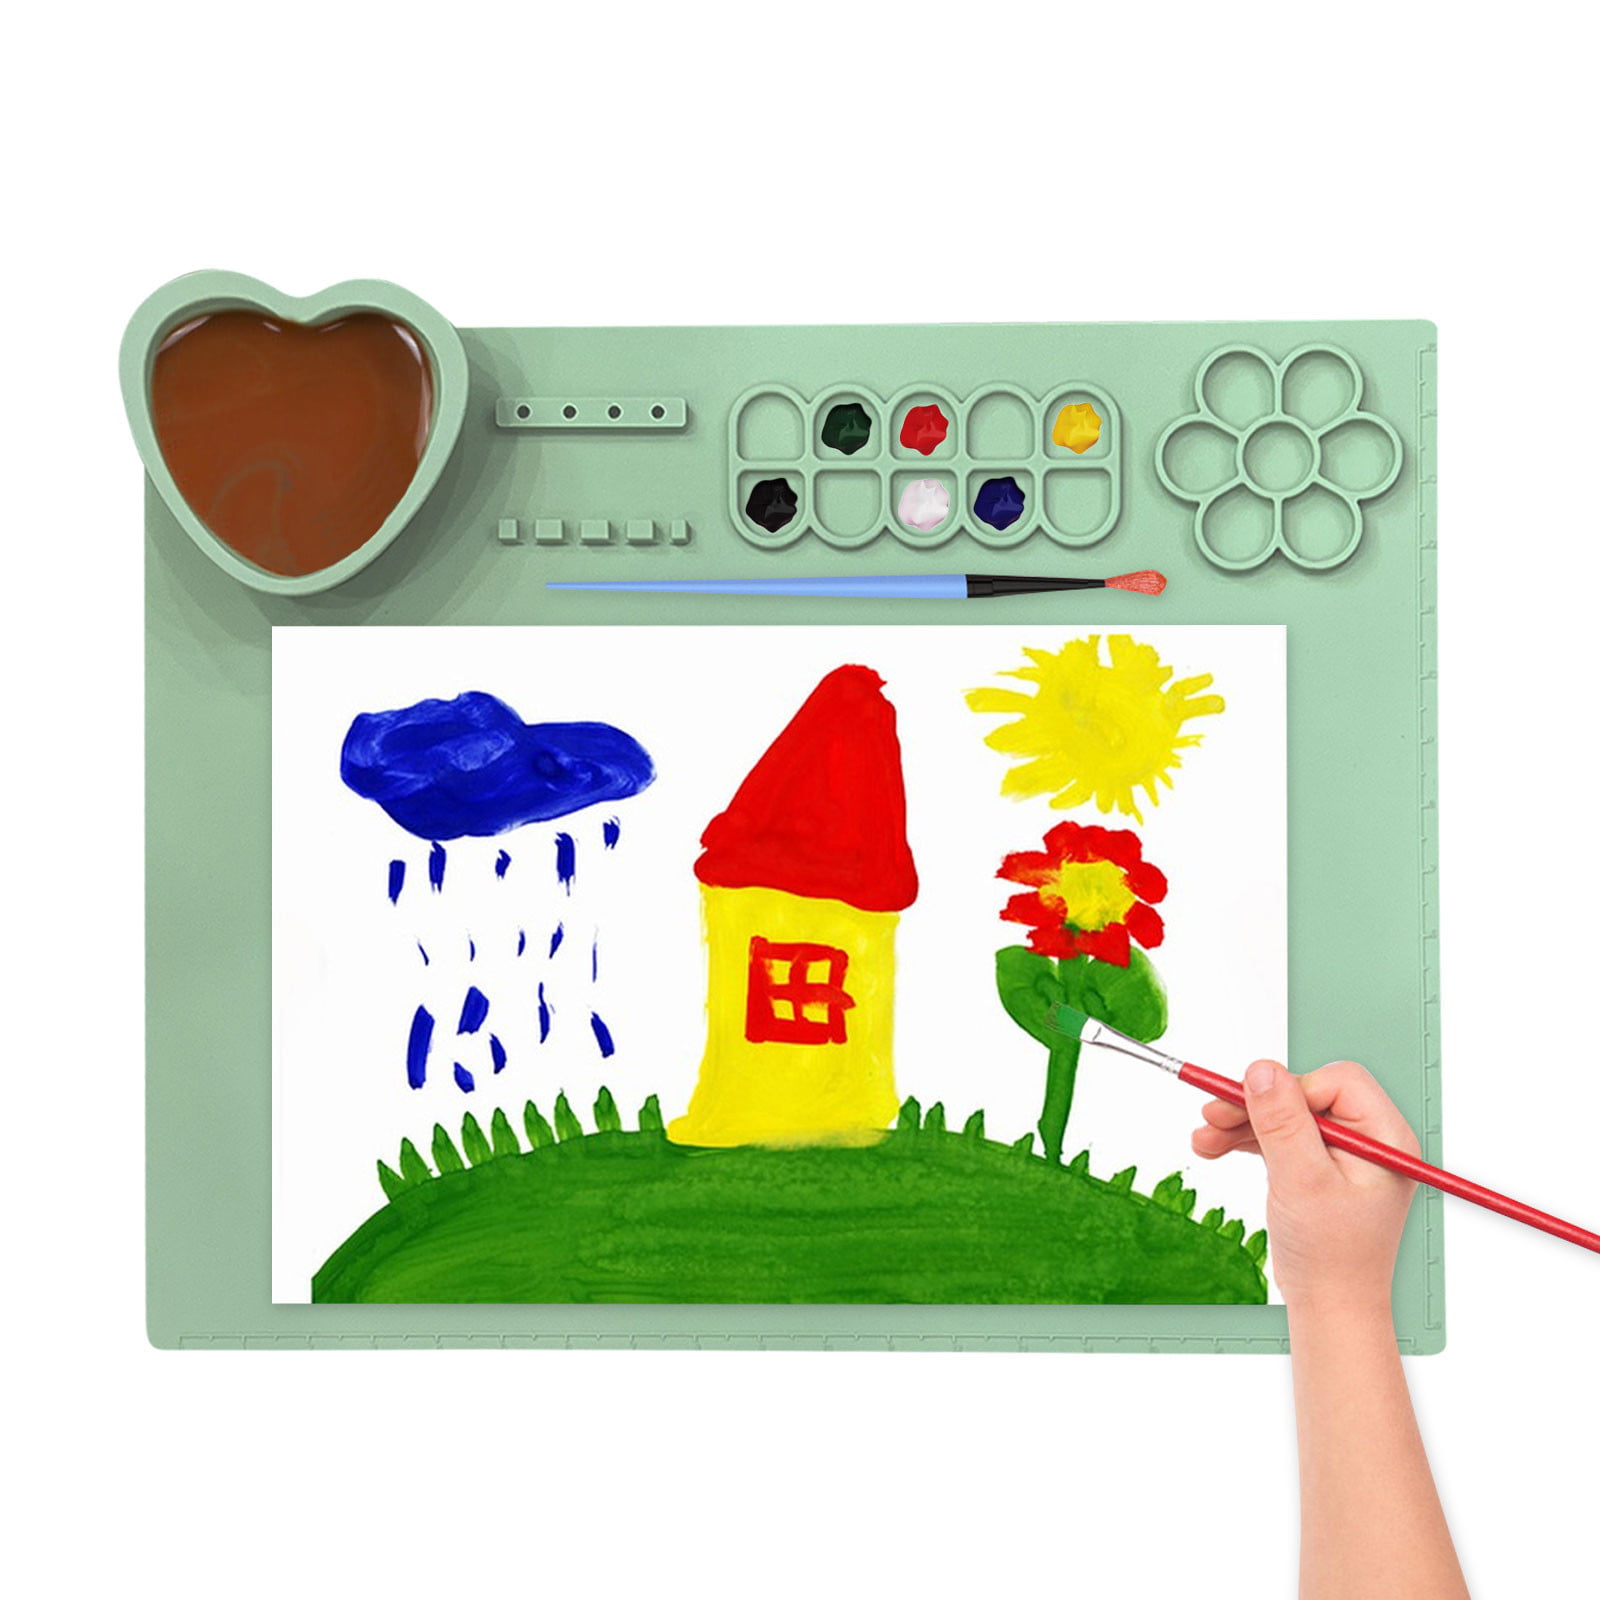 Silicone Craft Mat, Silicone Painting Mat for Resin Casting Non Stick  Silicone Art Mat School Silicone Craft Mat with Cleaning Cup for Kids  Painting